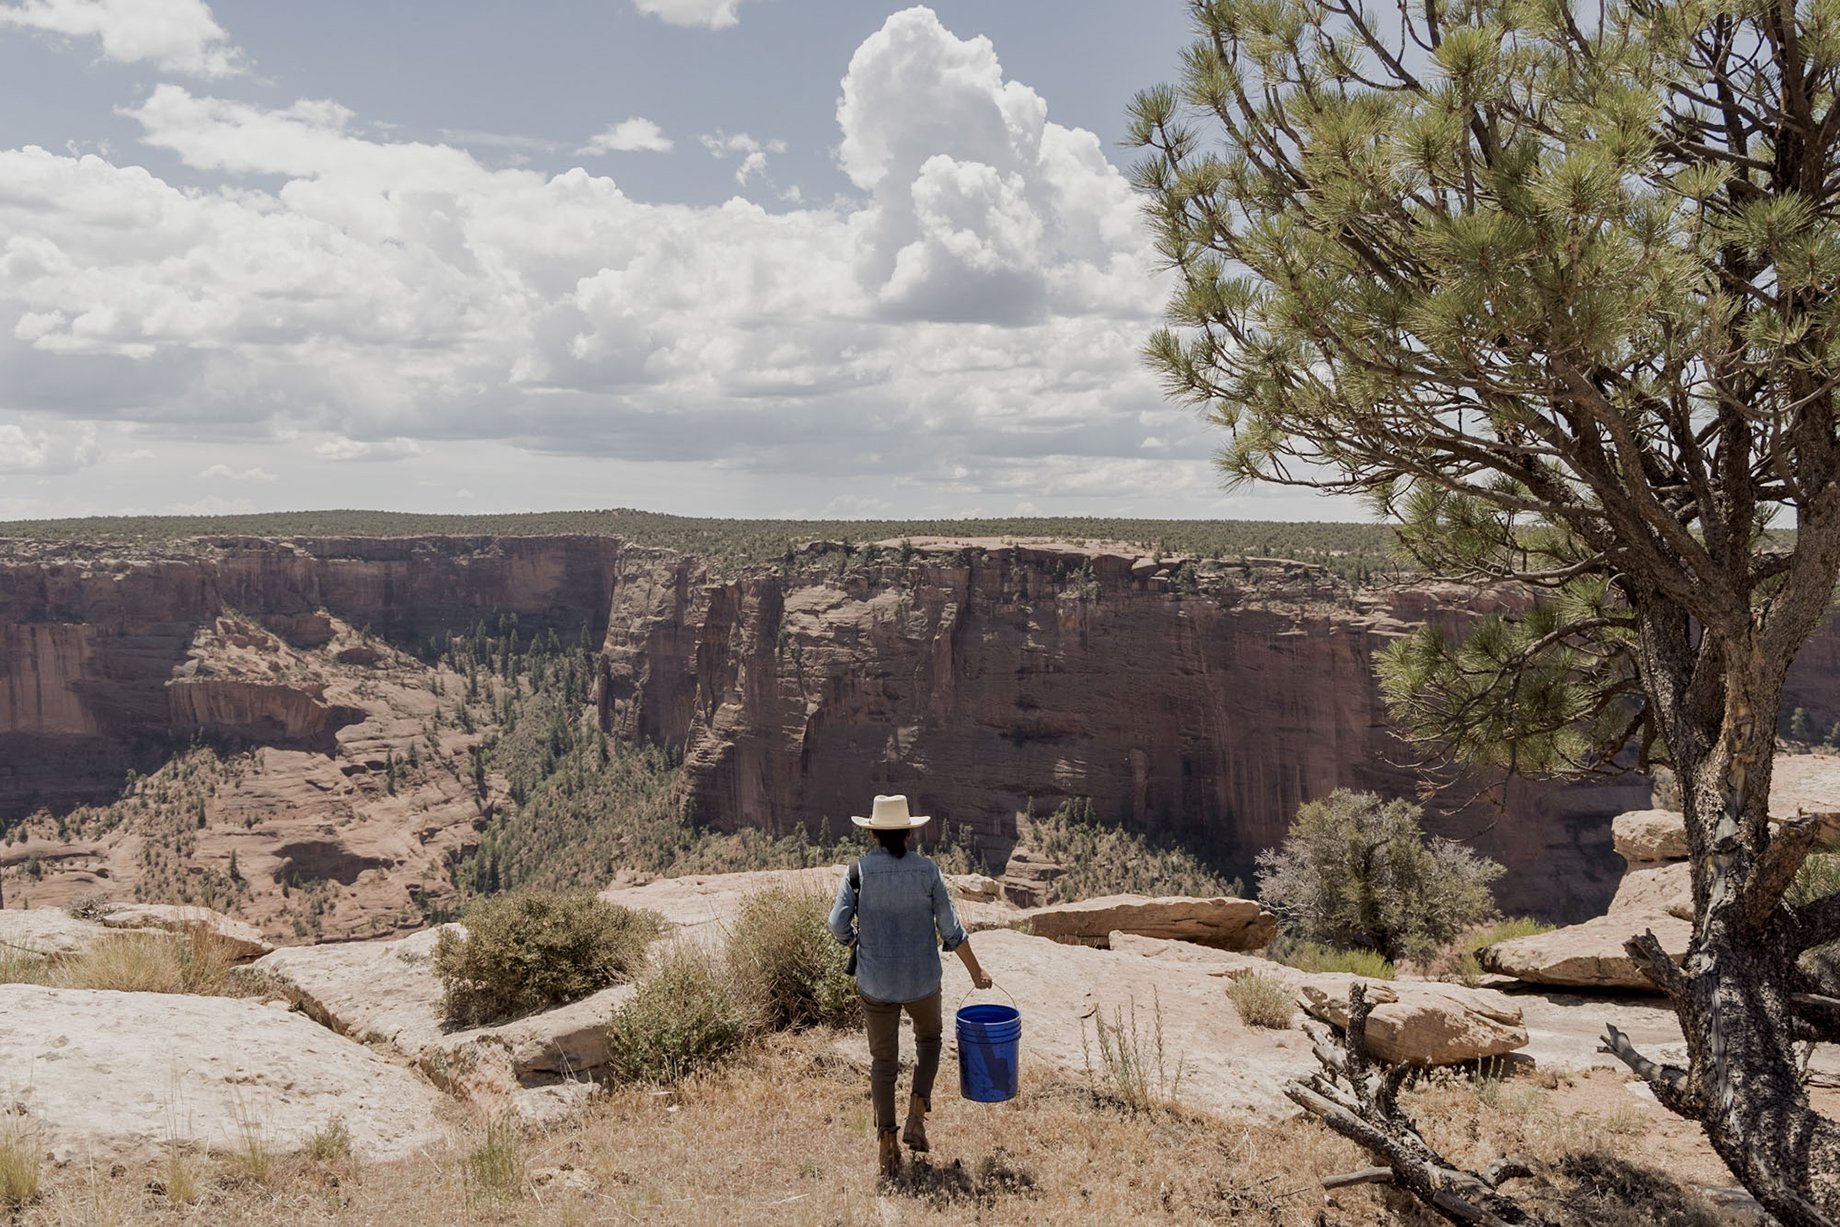 Missy Begay foraging for ingredients on the rim of Canyon de Chelly shot by Minesh Bacarina for Outside Magazine